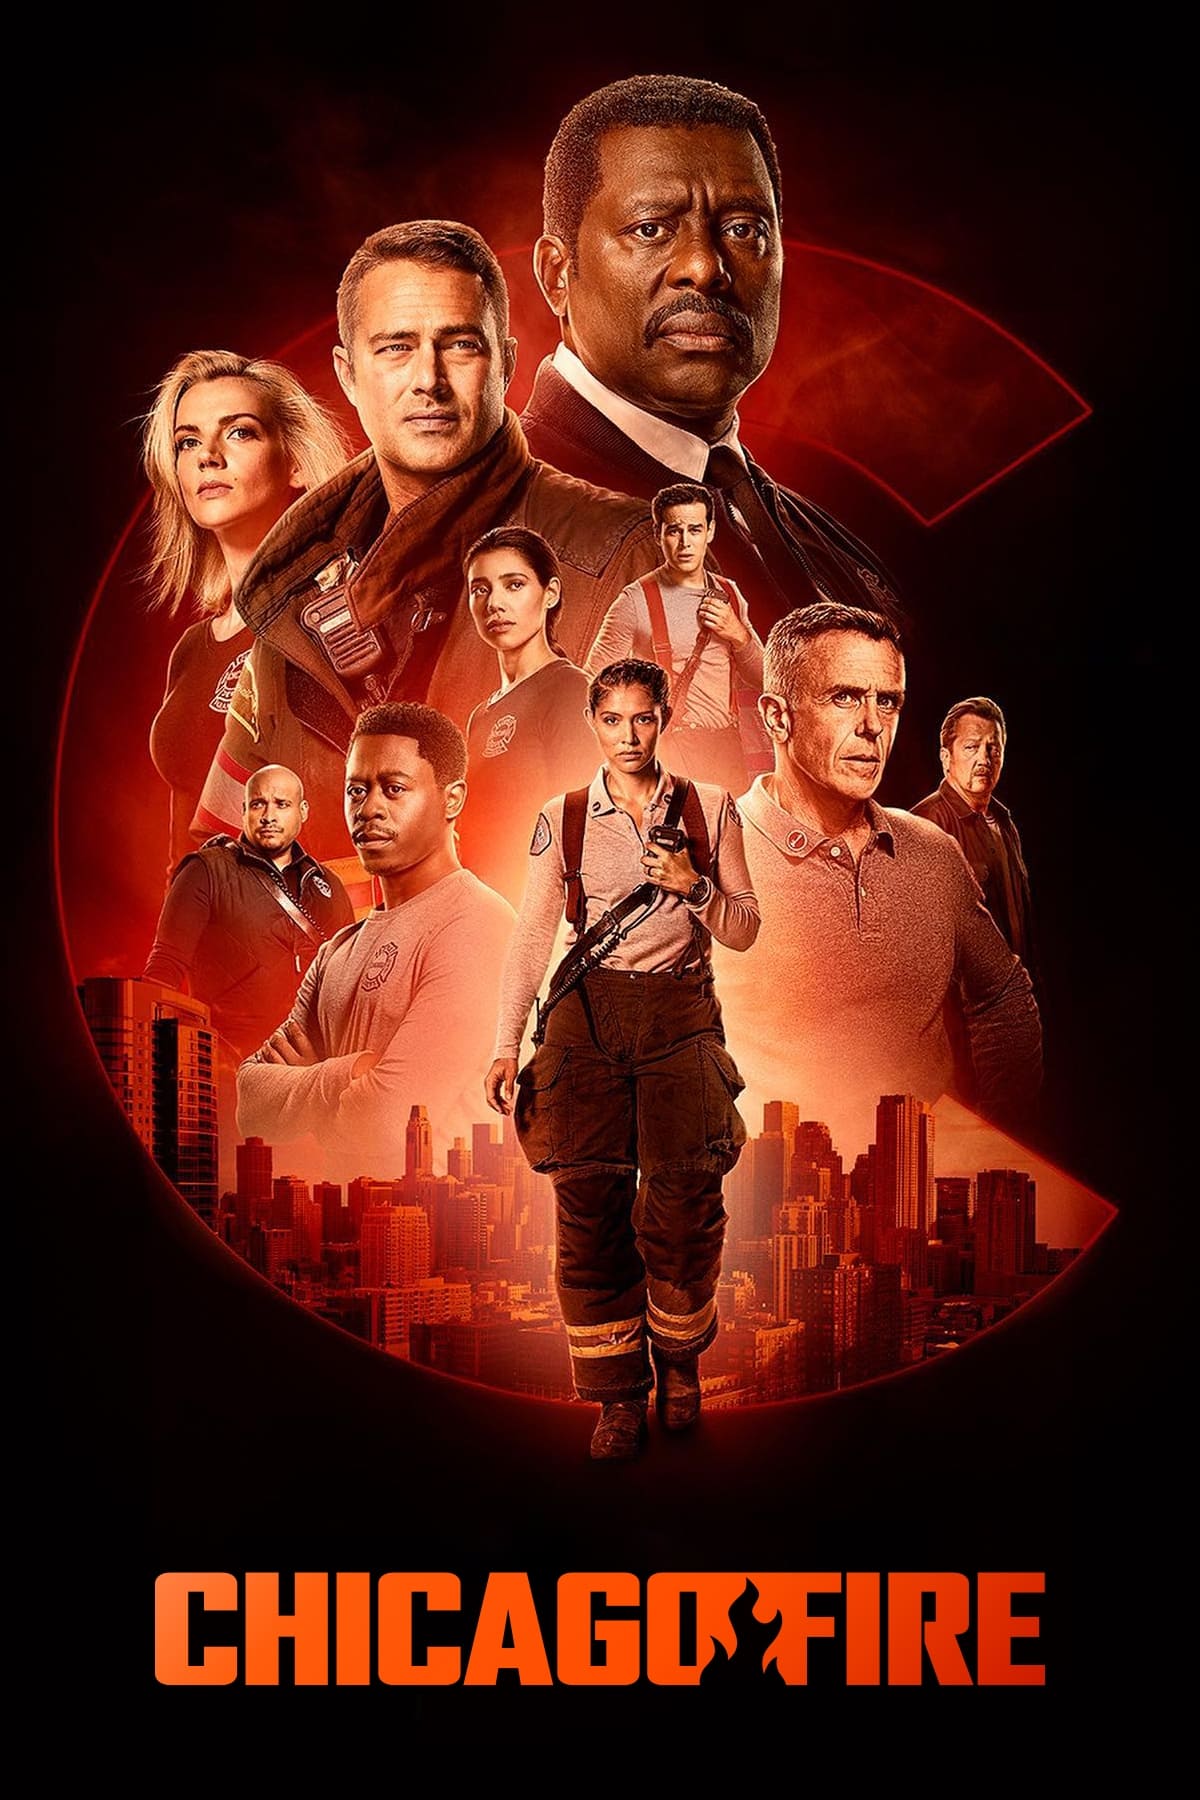 Chicago Fire TV Shows About Crime Investigation